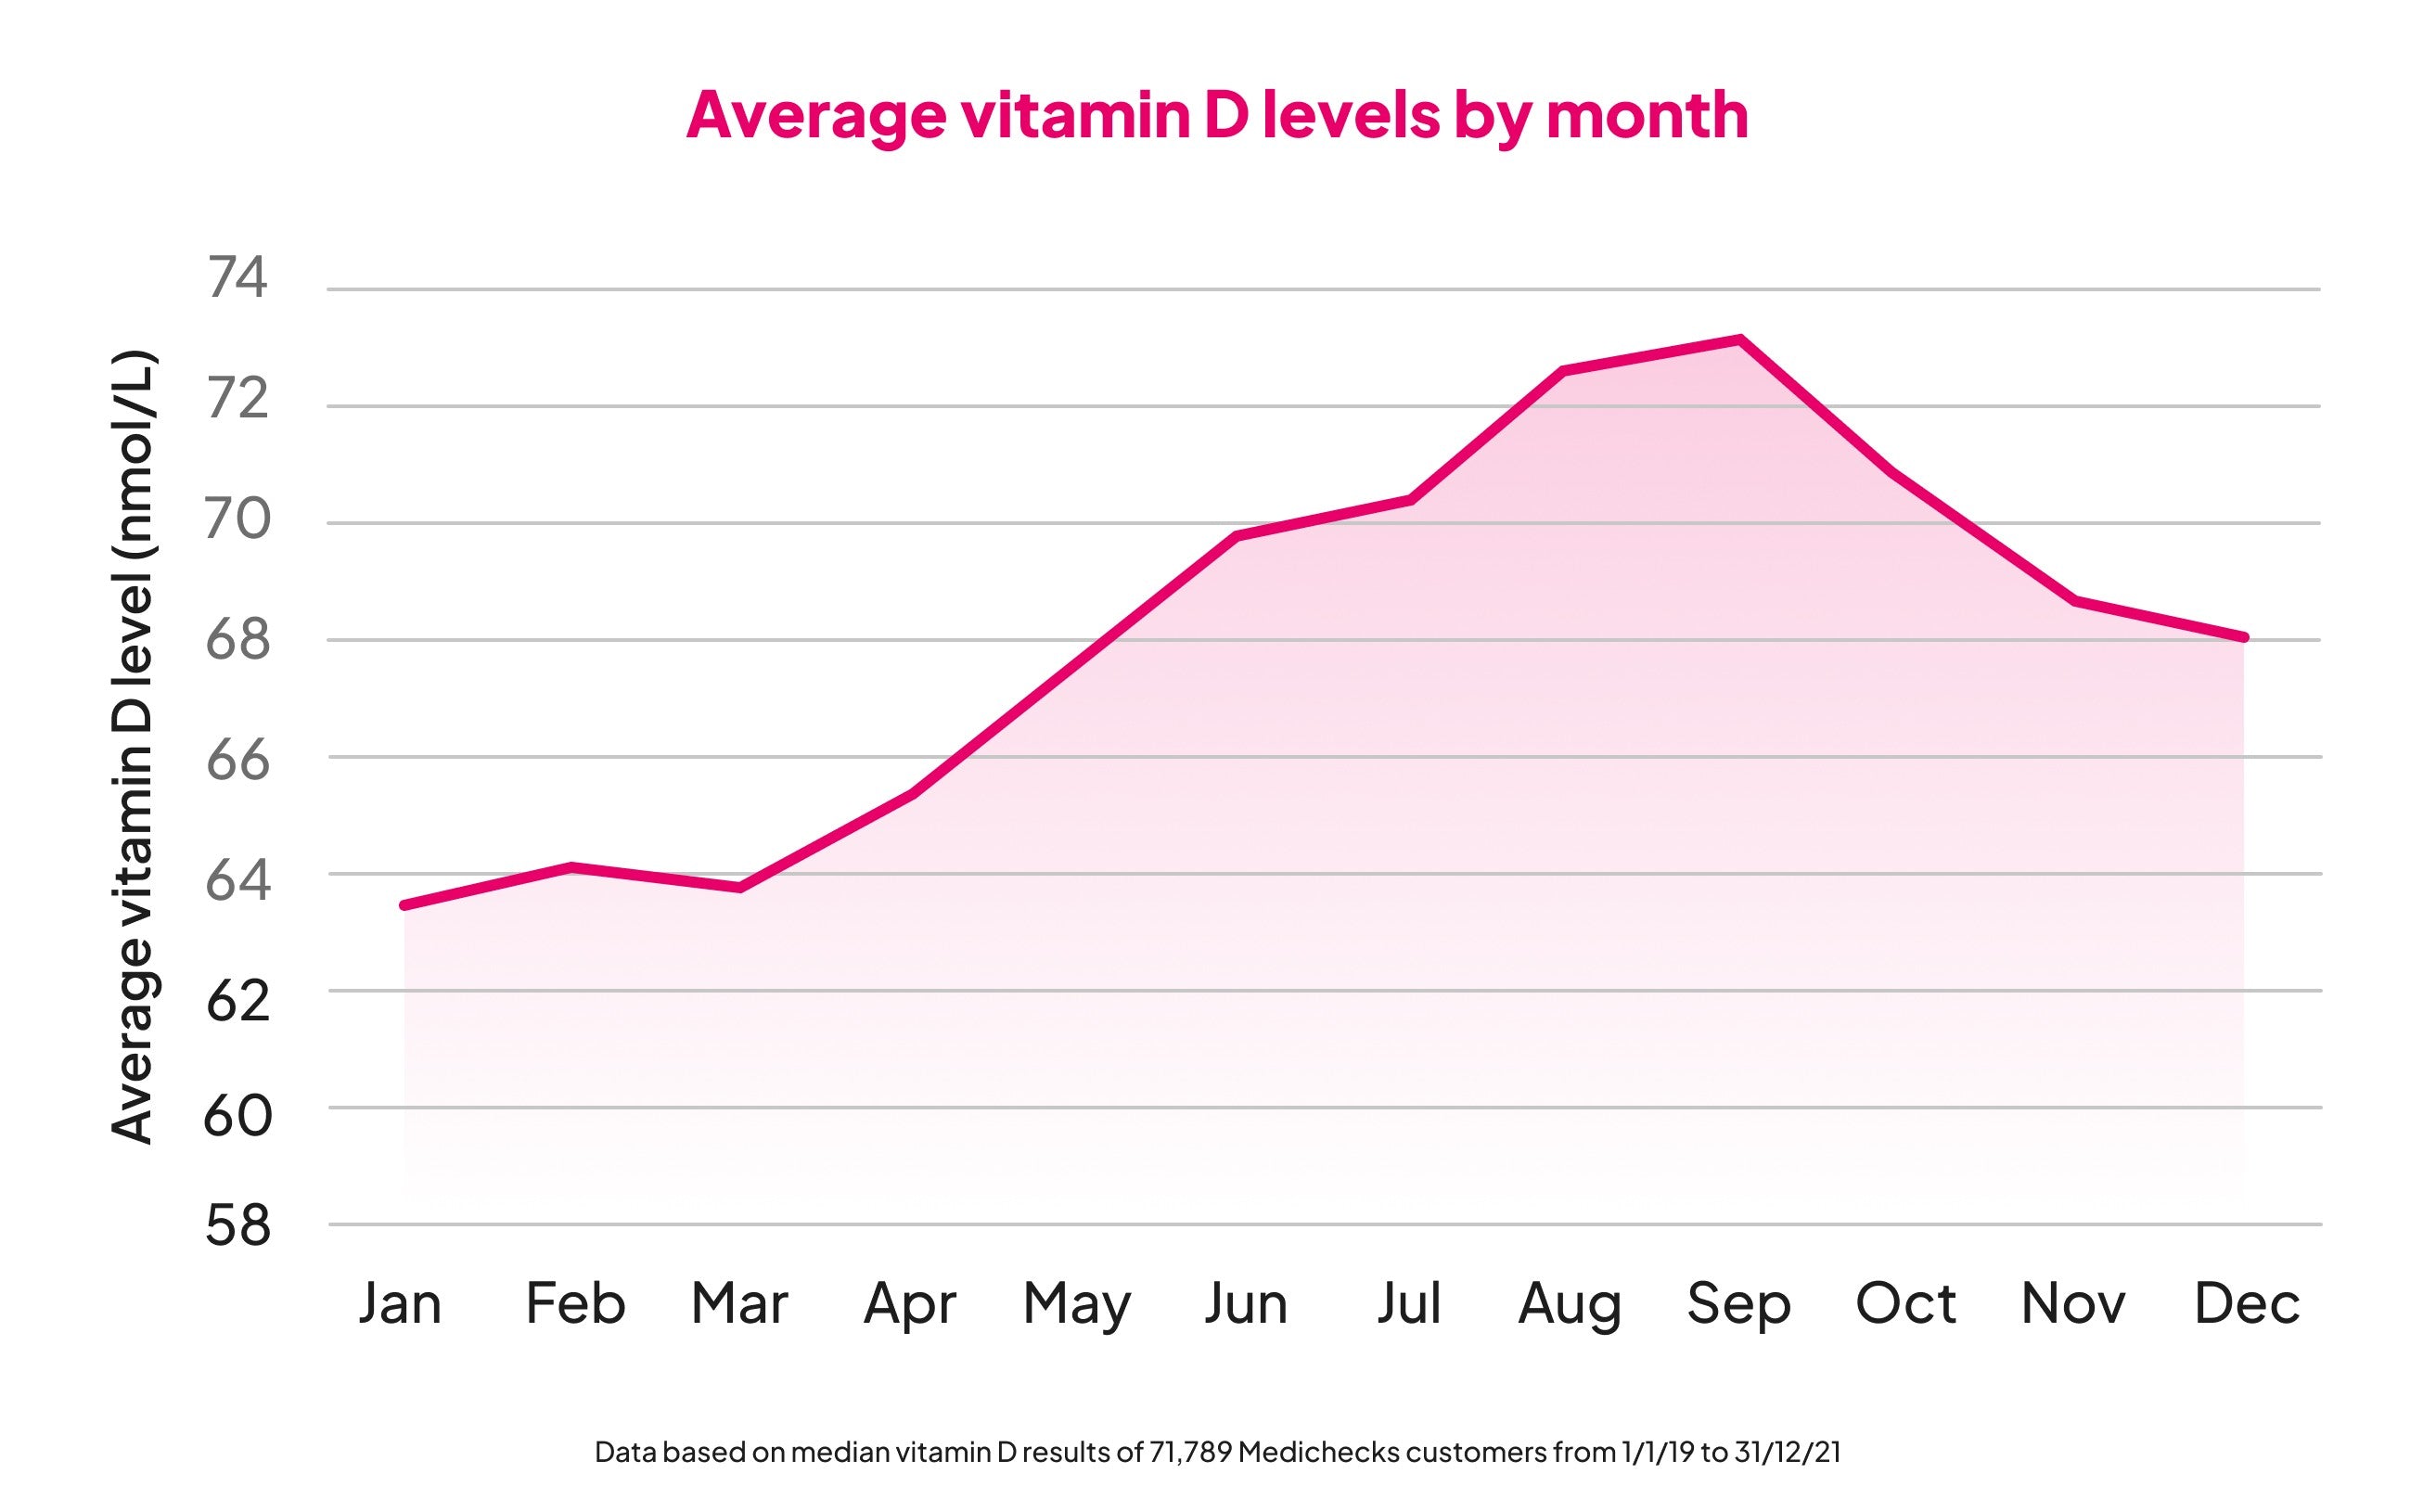 Average vitamin D levels by month graph